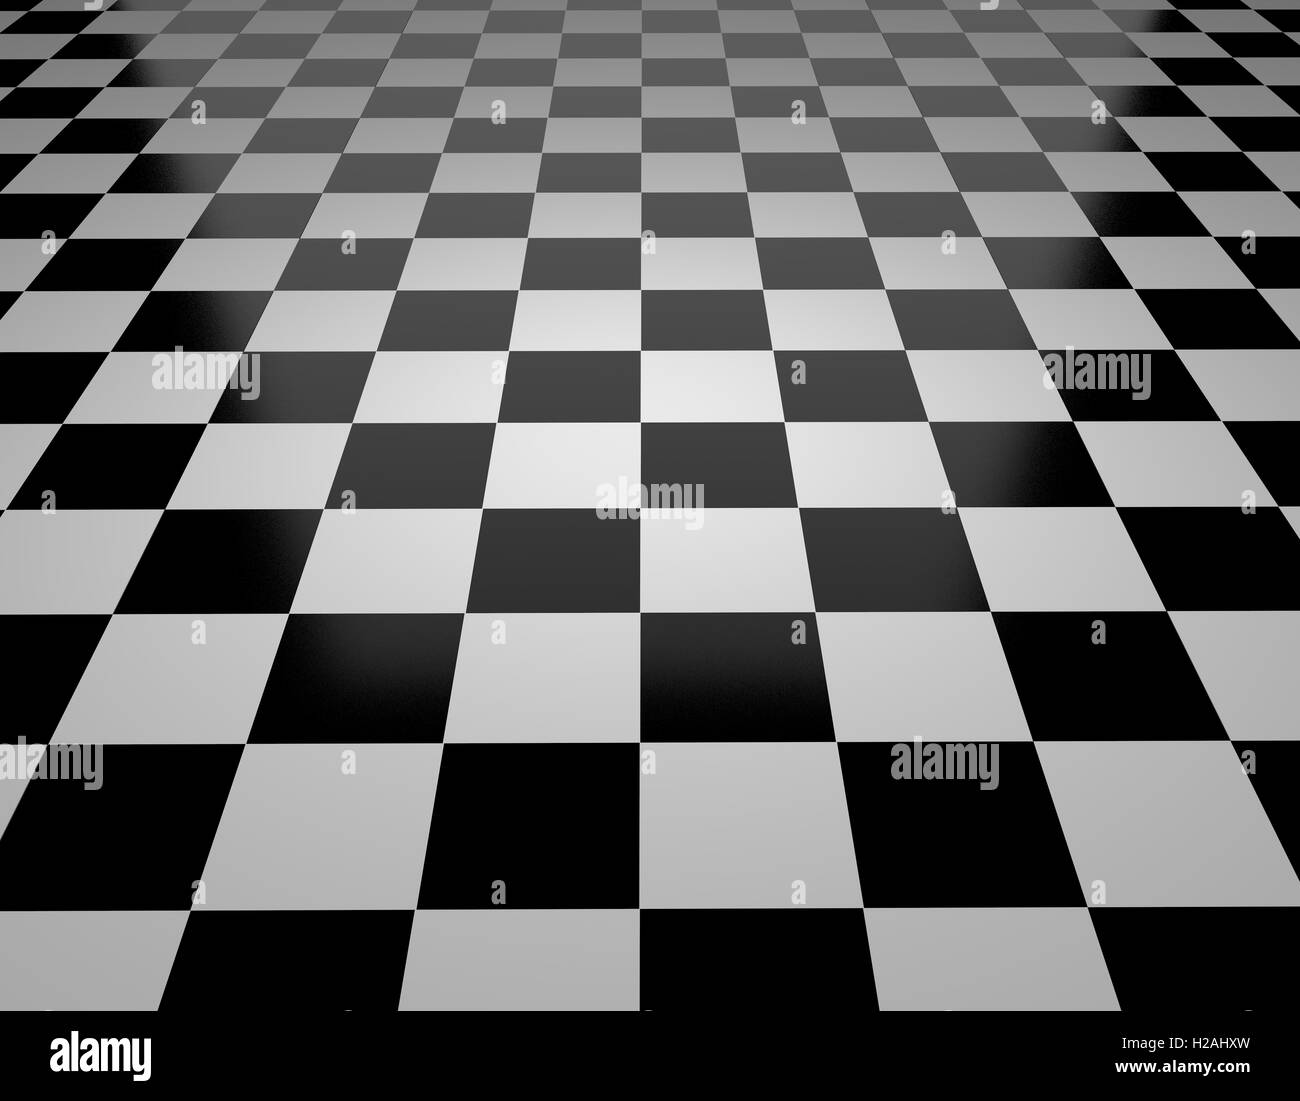 Chessboard, chess, checkers, checkered flag, 3d rendering Stock Photo